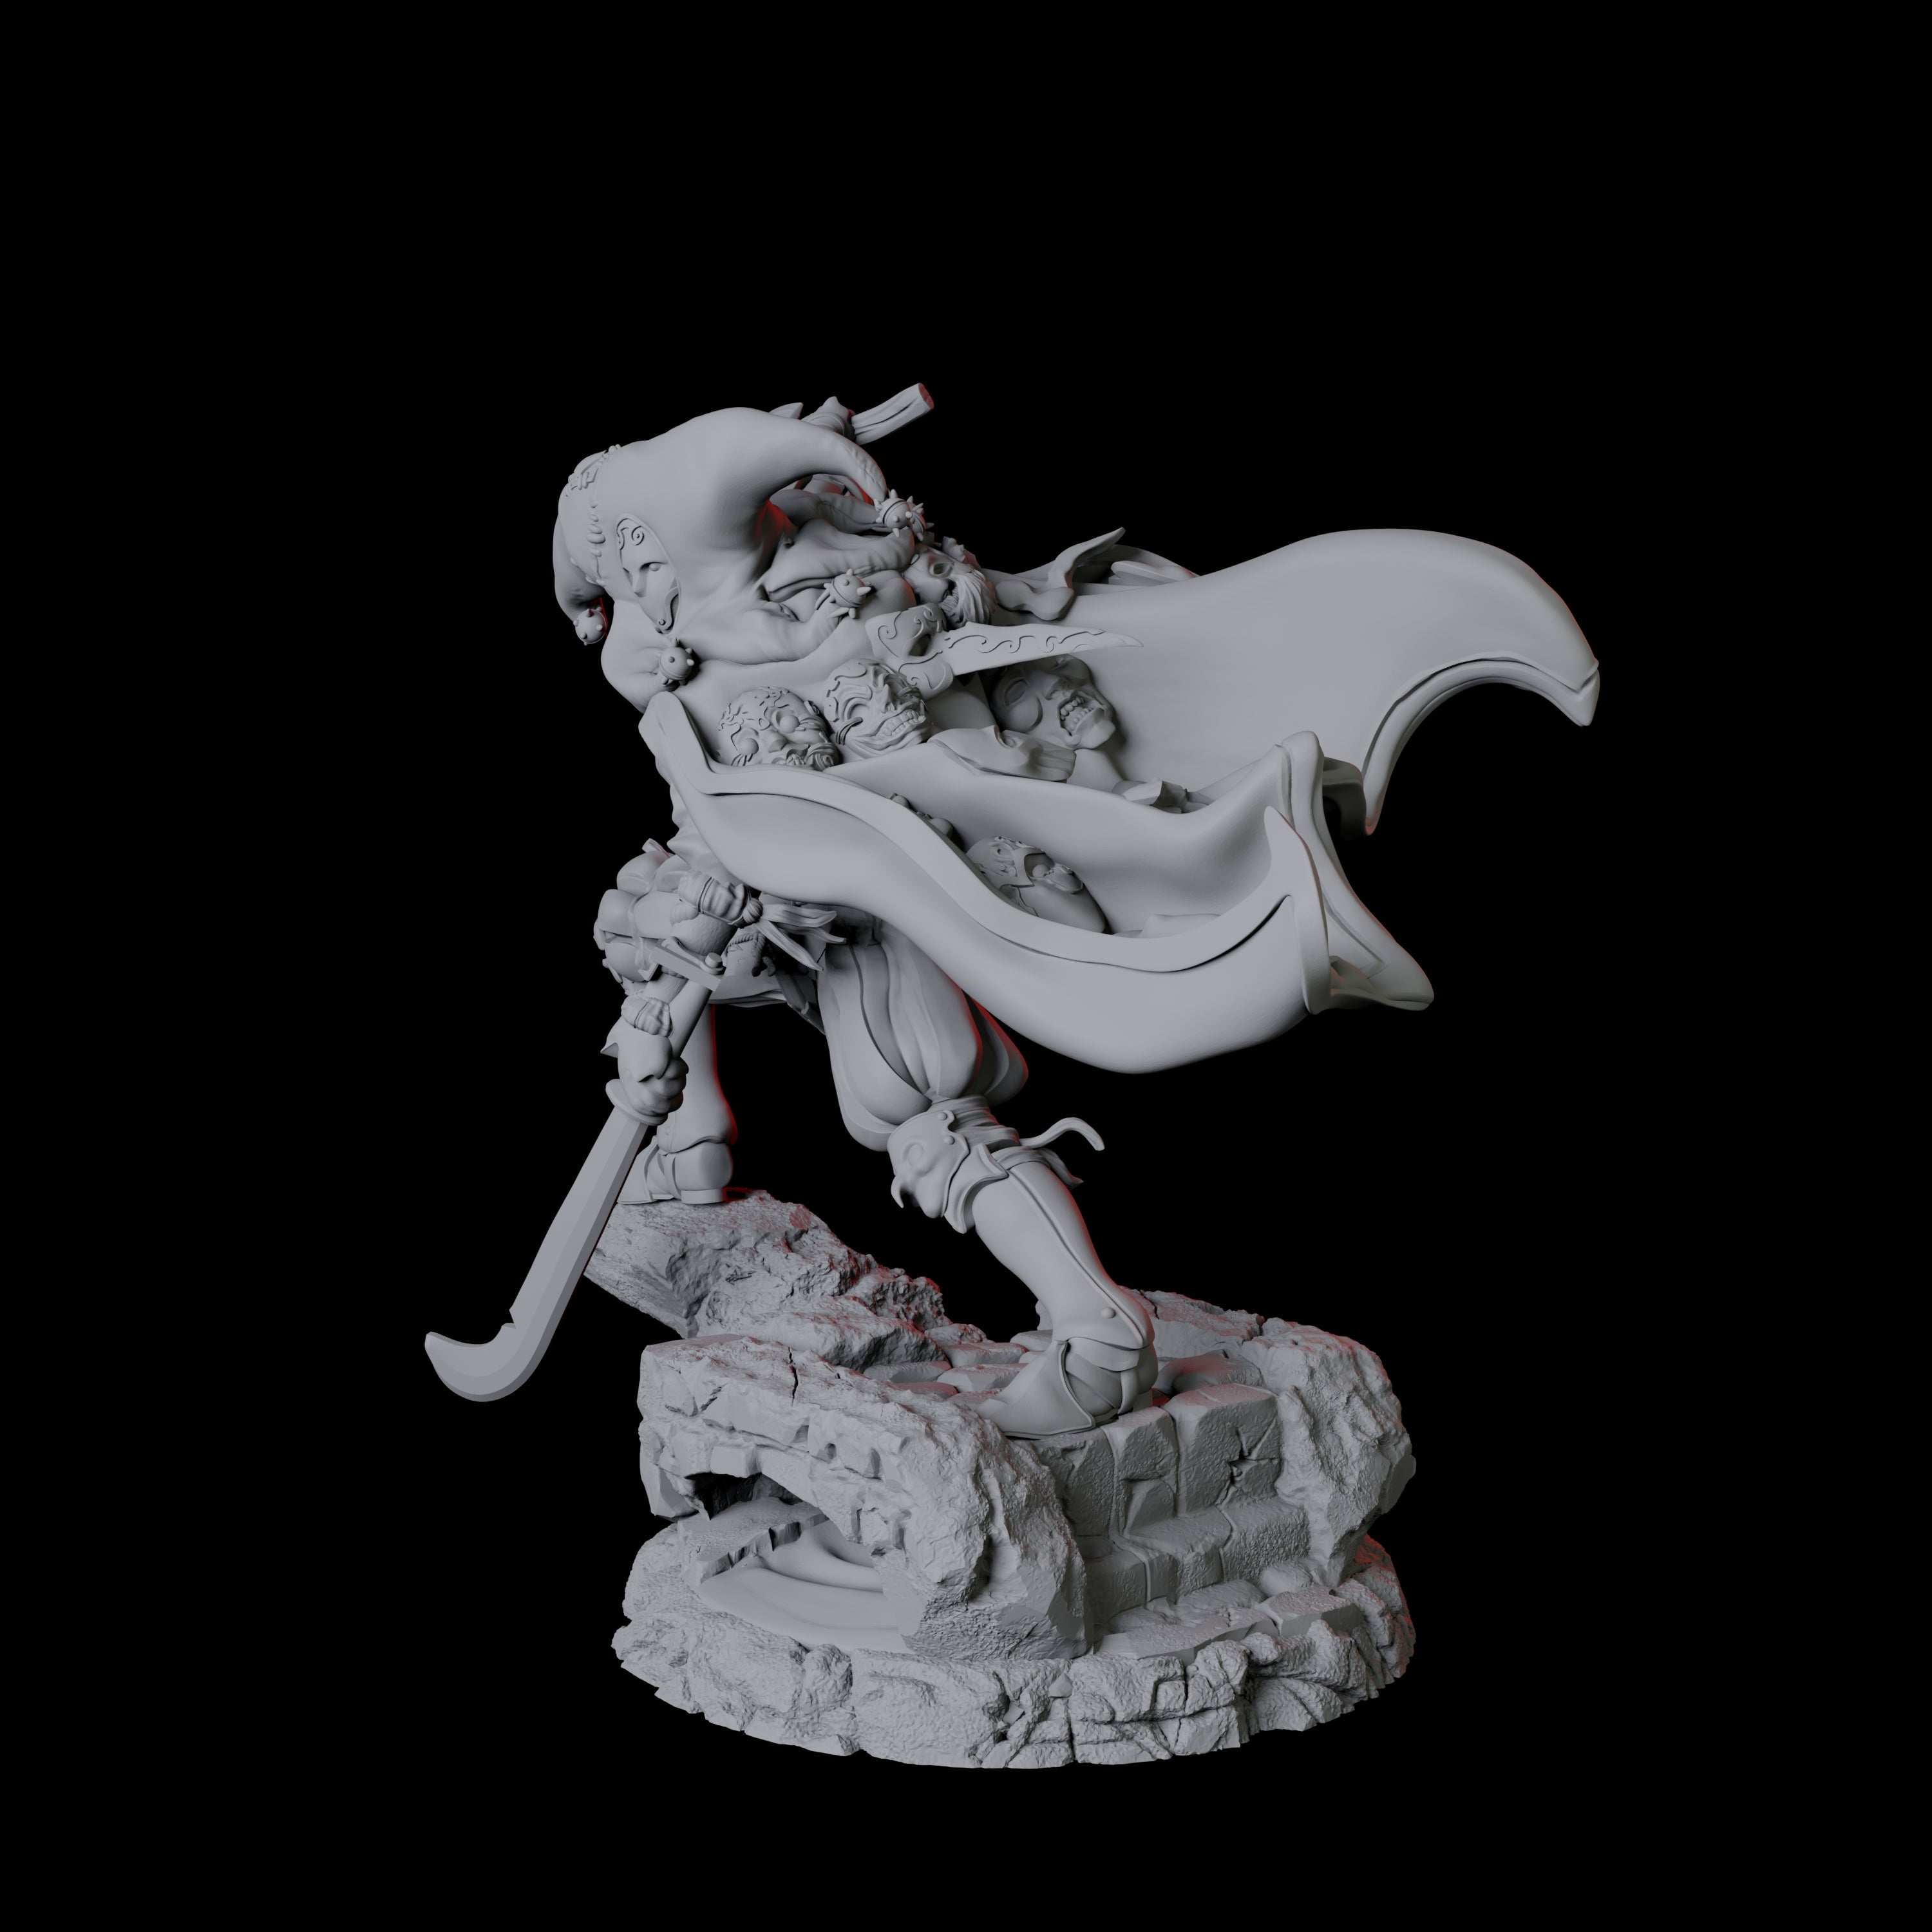 Masked Swordsman D Miniature for Dungeons and Dragons, Pathfinder or other TTRPGs